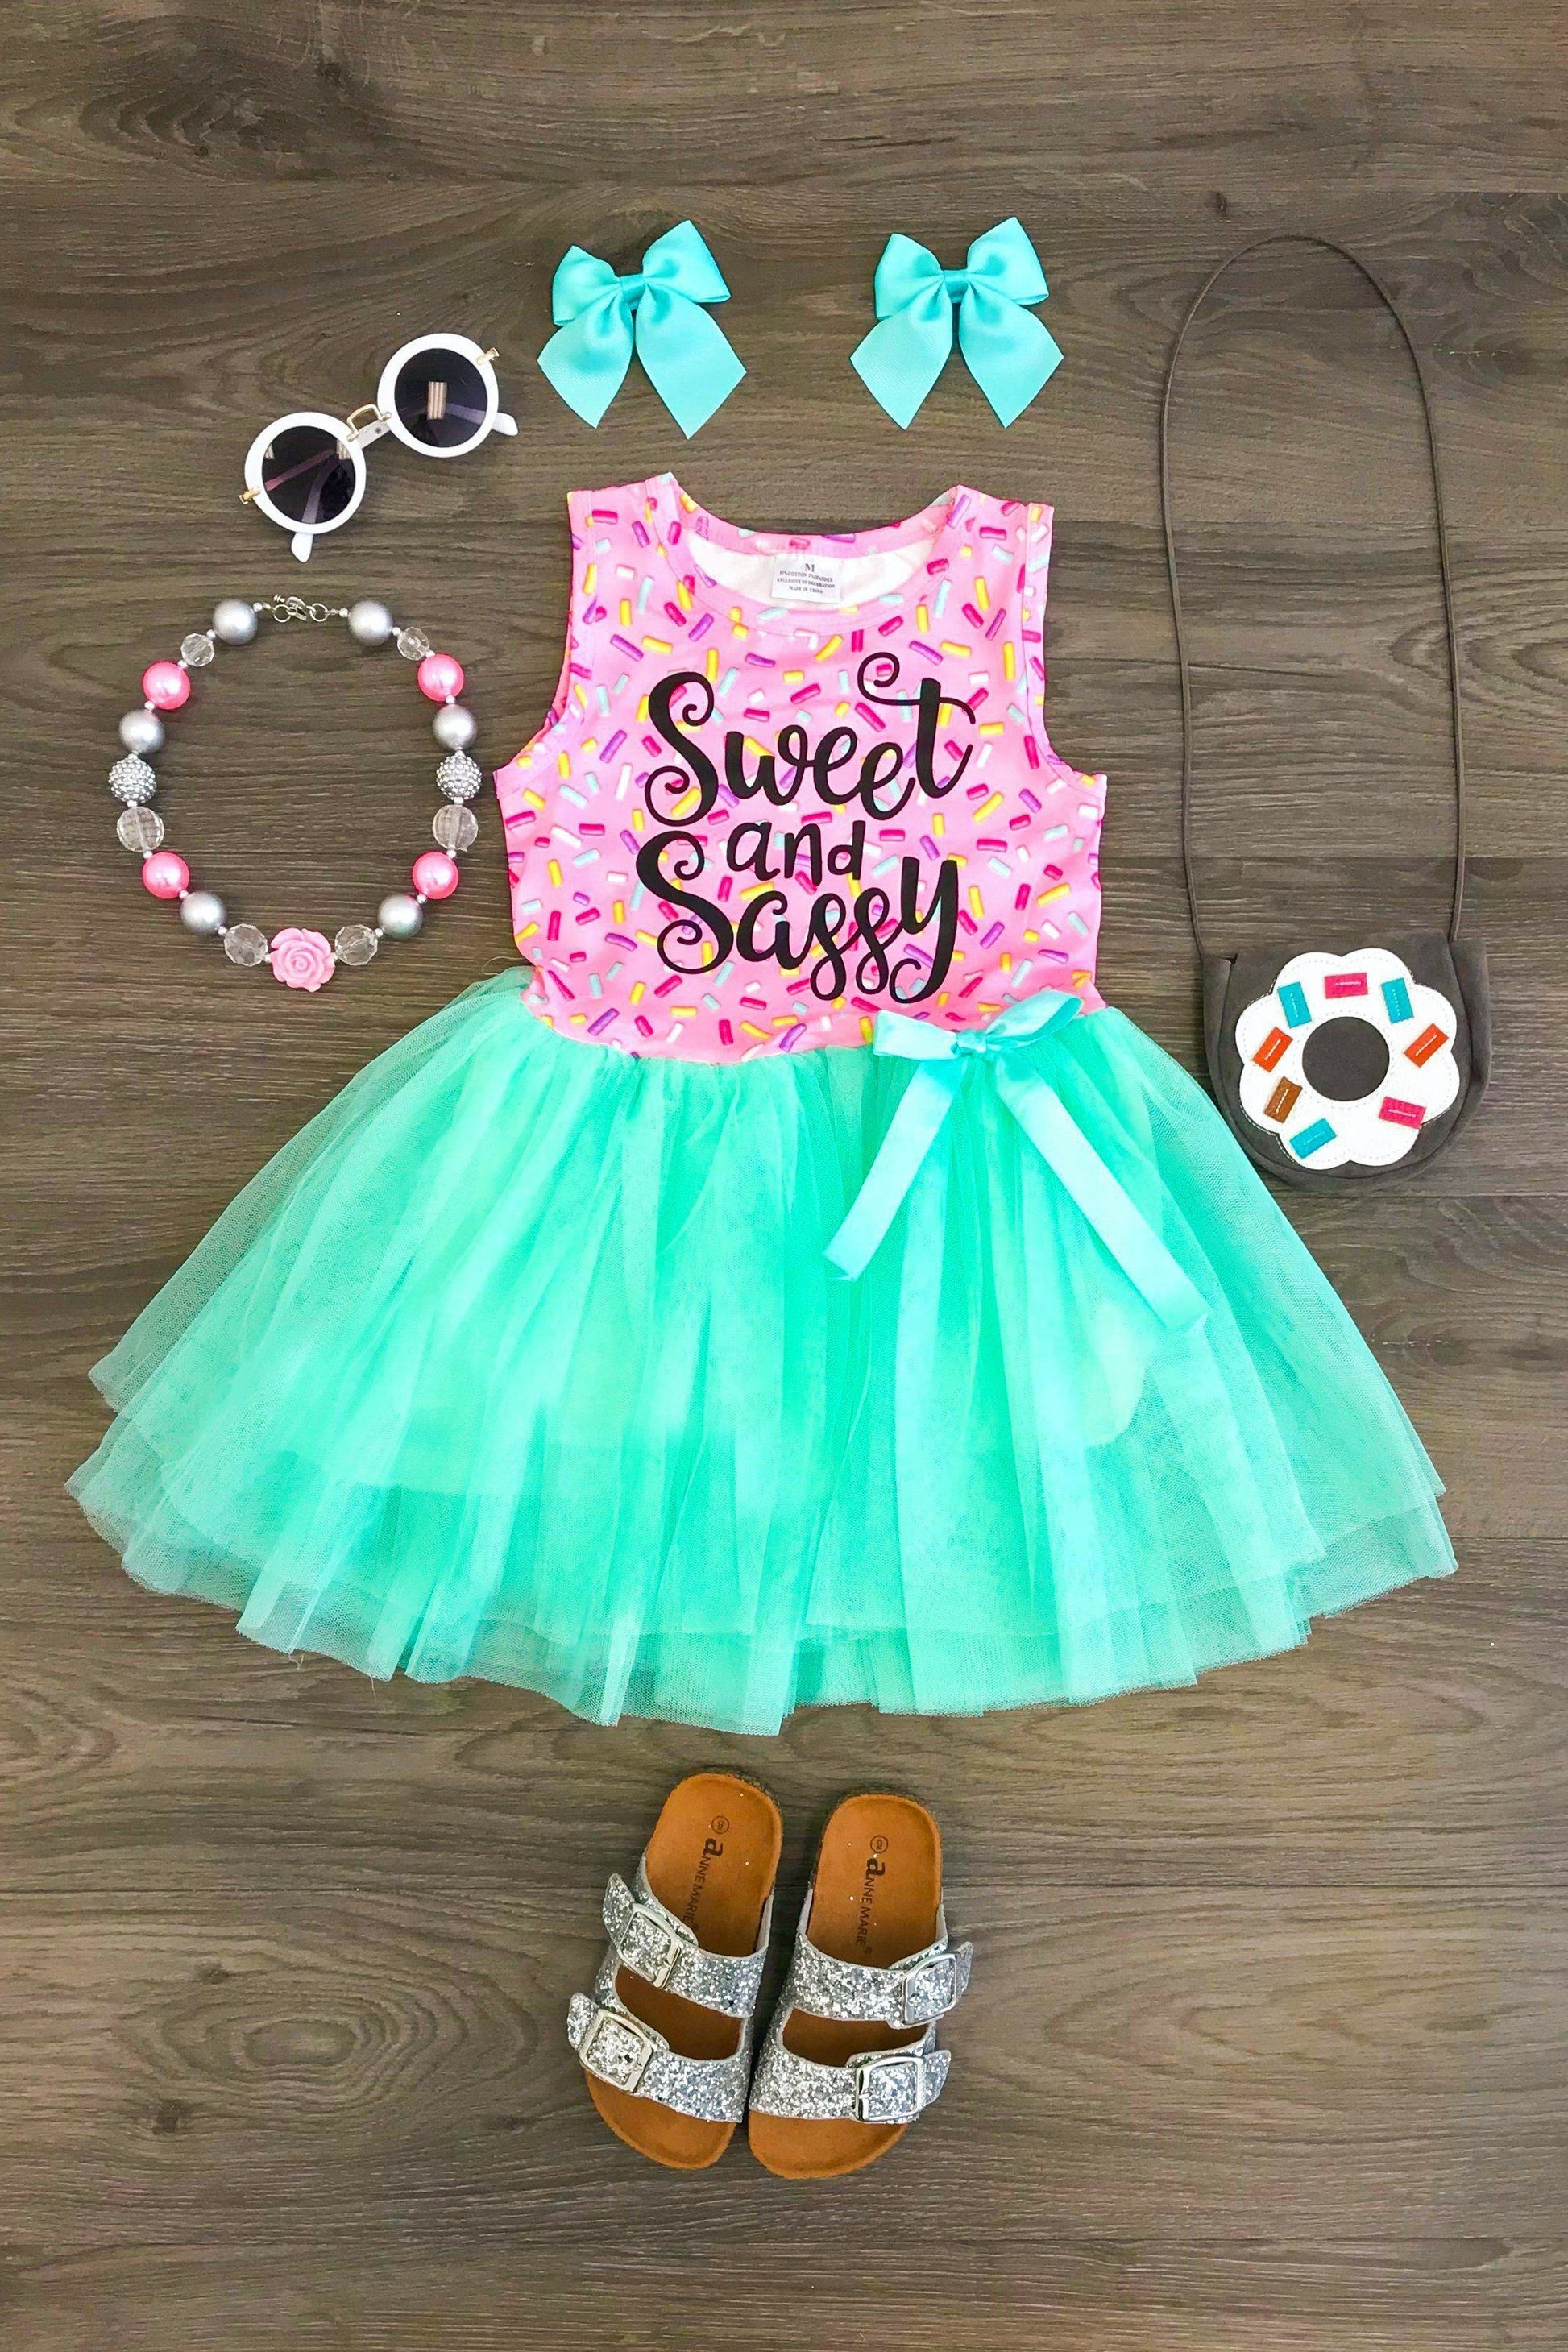 Short sets { All my pants are sassy, sassy by nature, - Stacy's Pink Martini Boutique